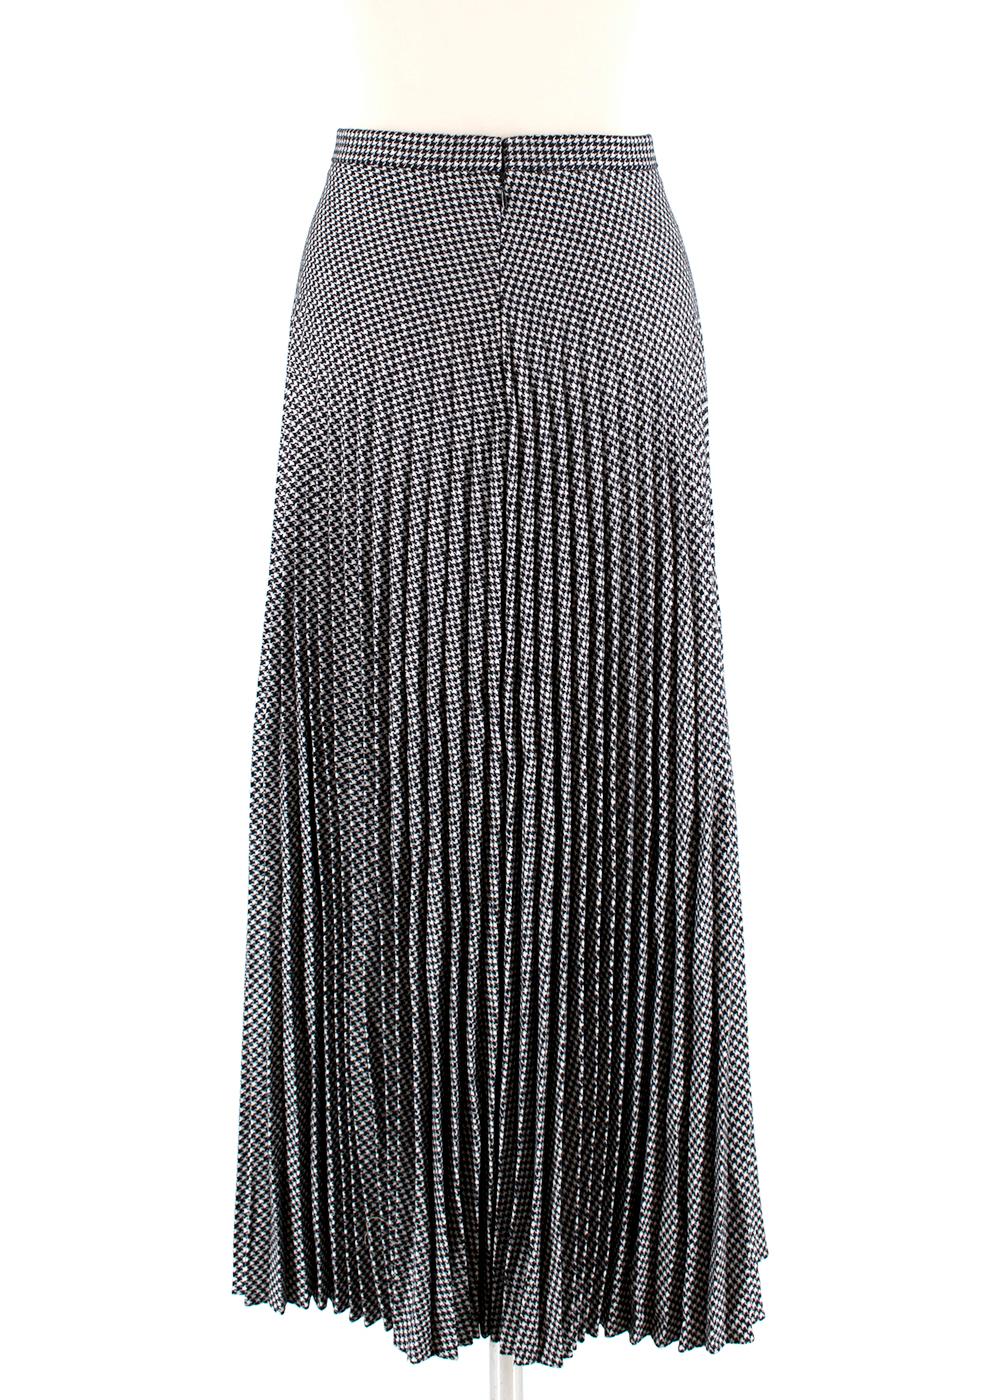 Christian Dior Houndstooth Pleated Skirt  

- Side Concealed Zip and Hook Clasp Closure 
- Fully Lined 
- Soft Pleats 
- Tailored Waistband 
- Floor Length

Materials:
- 75% Wool 
- 25% Polyester 
- 100% Silk Lining 

Made in Italy 

Waist: